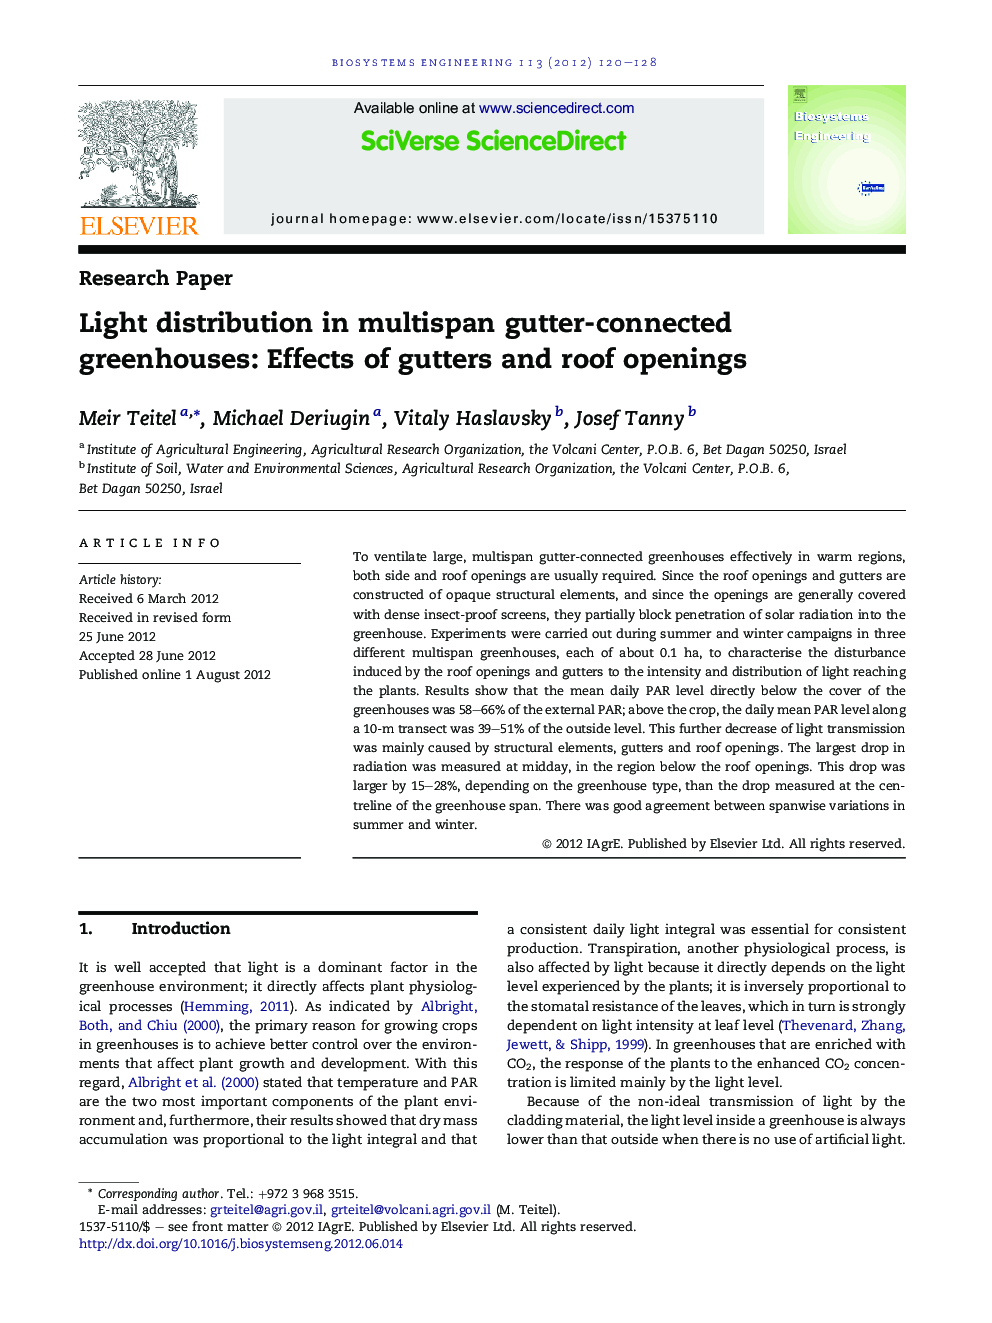 Light distribution in multispan gutter-connected greenhouses: Effects of gutters and roof openings